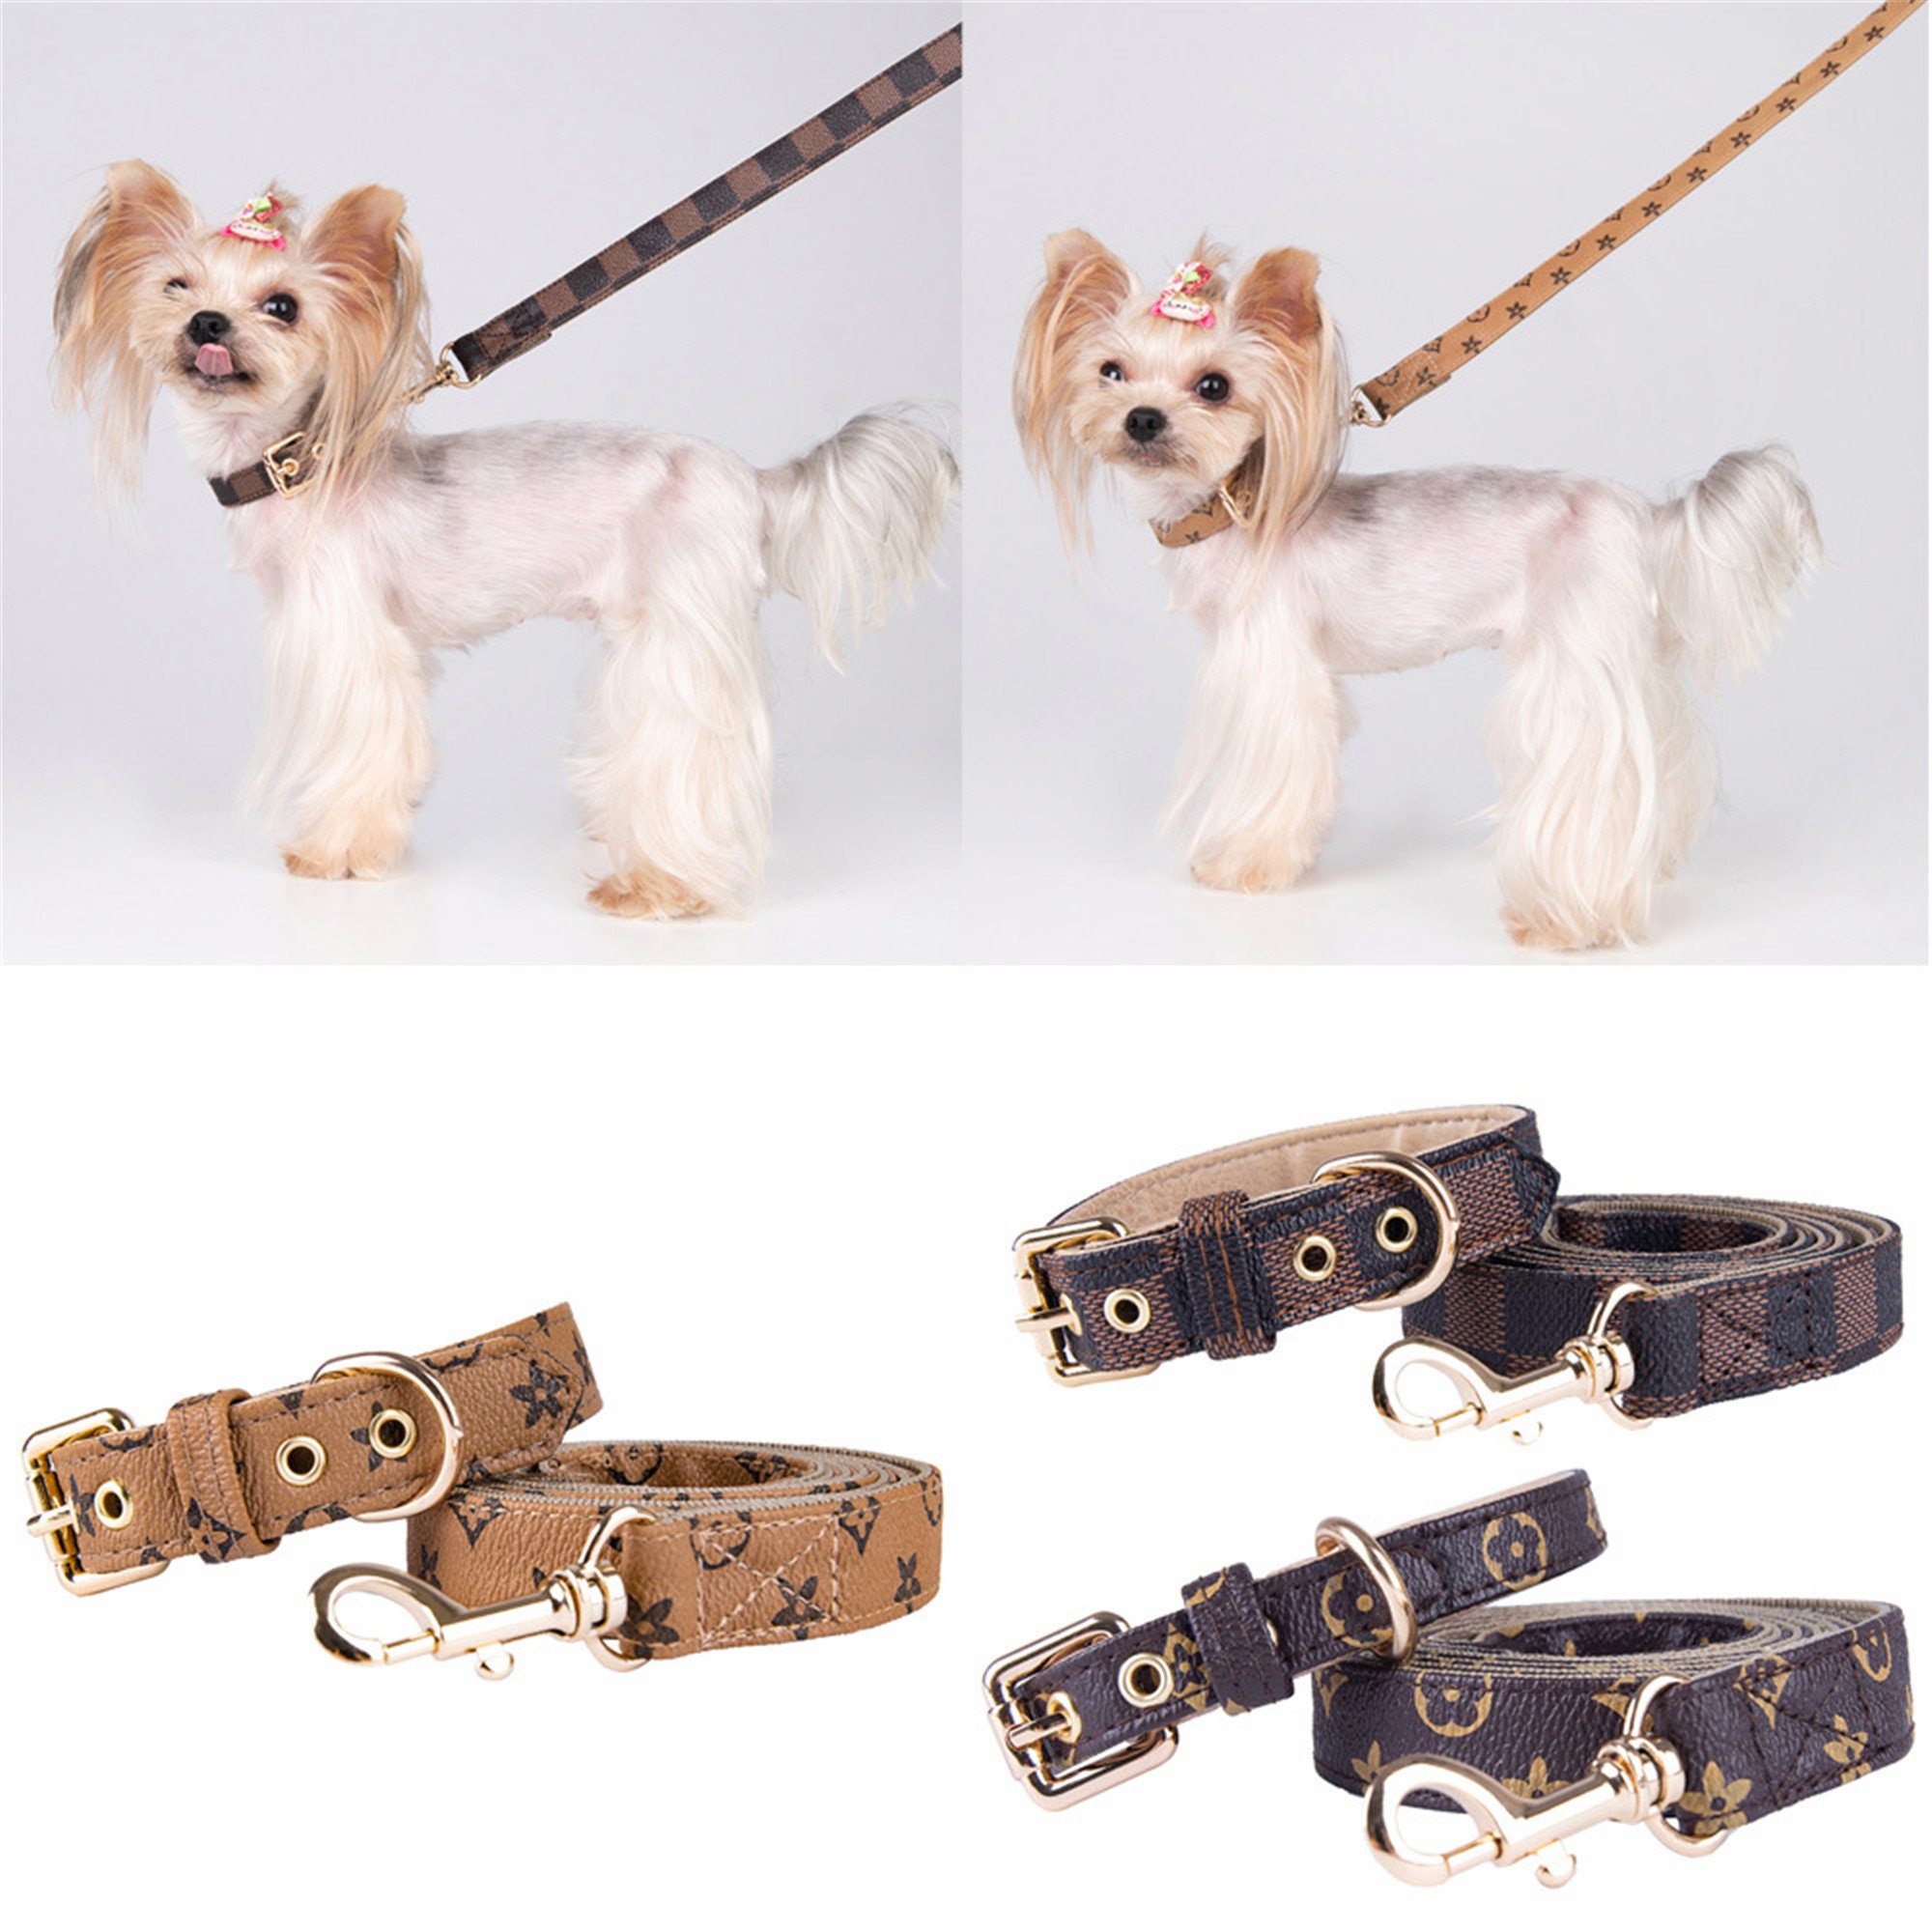 Chewy Vuitton  Harness  Leash Brown Set  Dog Apparel